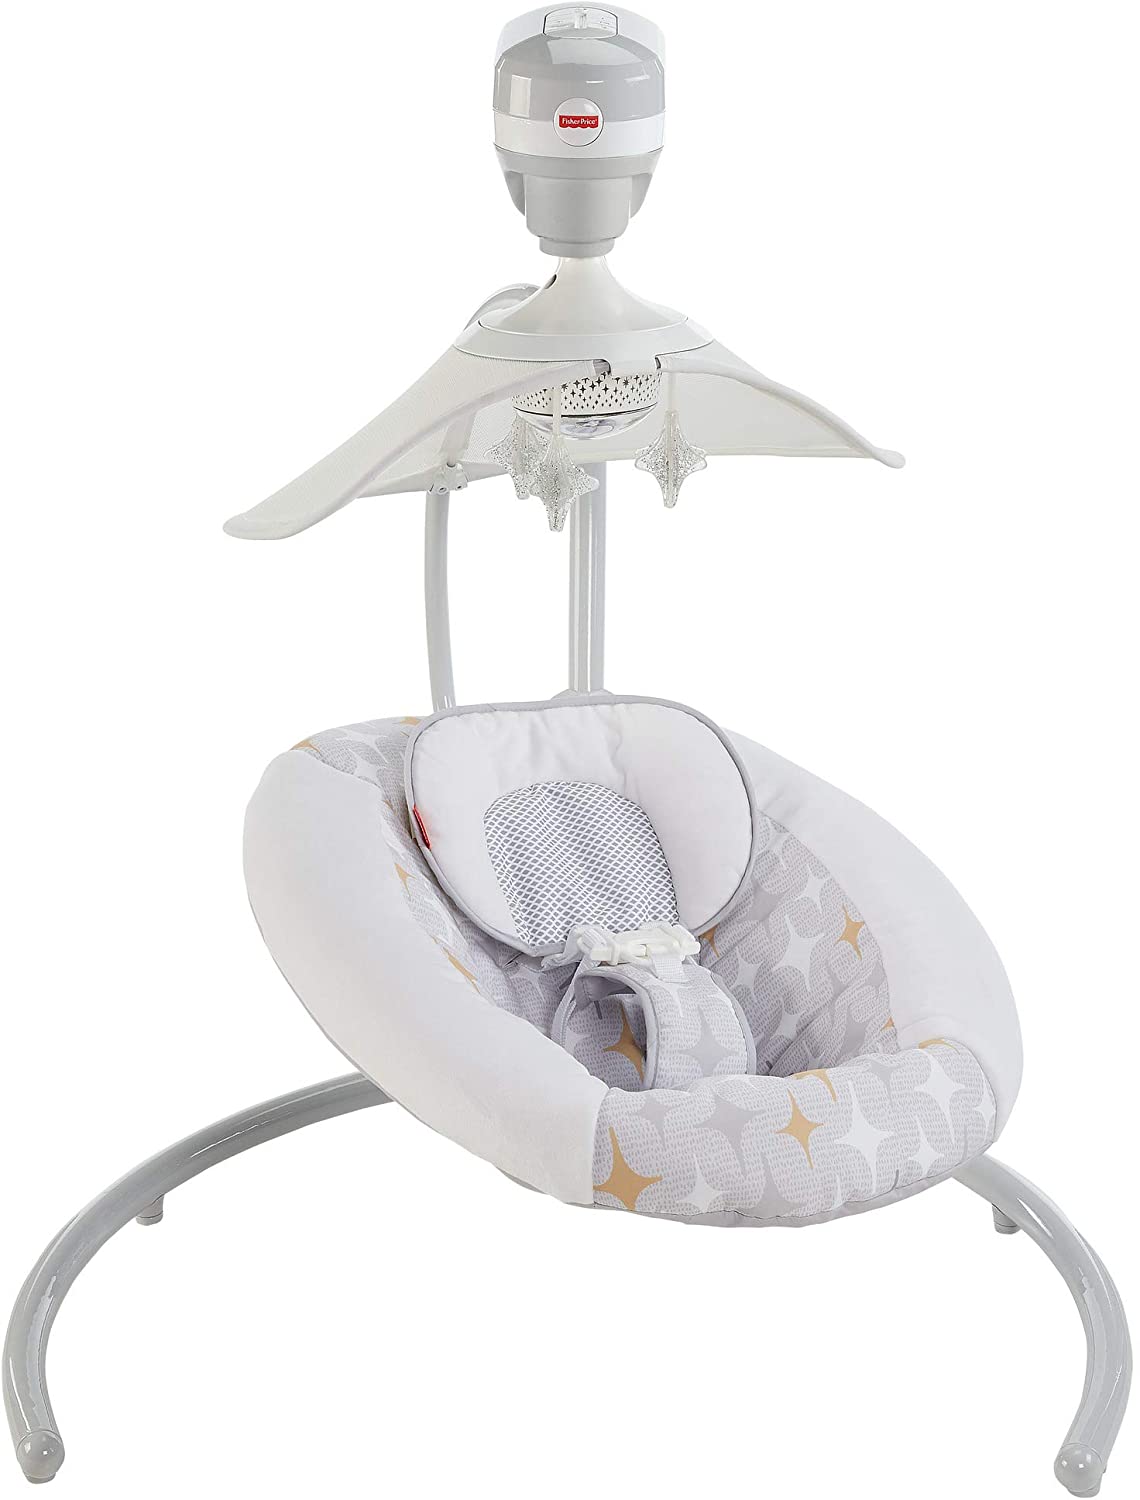 9 Best Fisher-Price Baby Swings 2022 - Review & Buying Guide 4